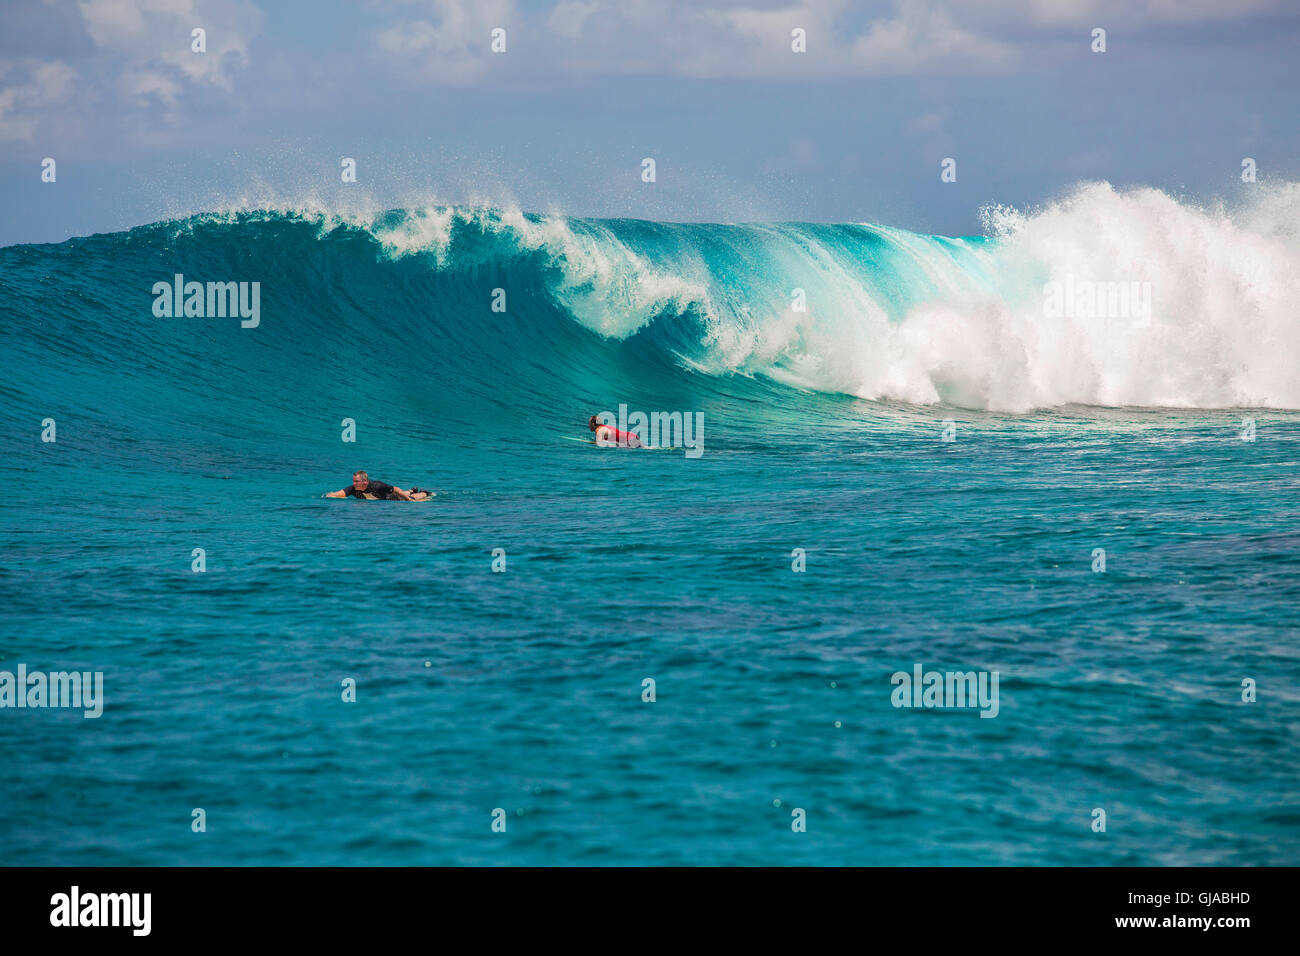 Surfer before plunging into a wave Stock Photo